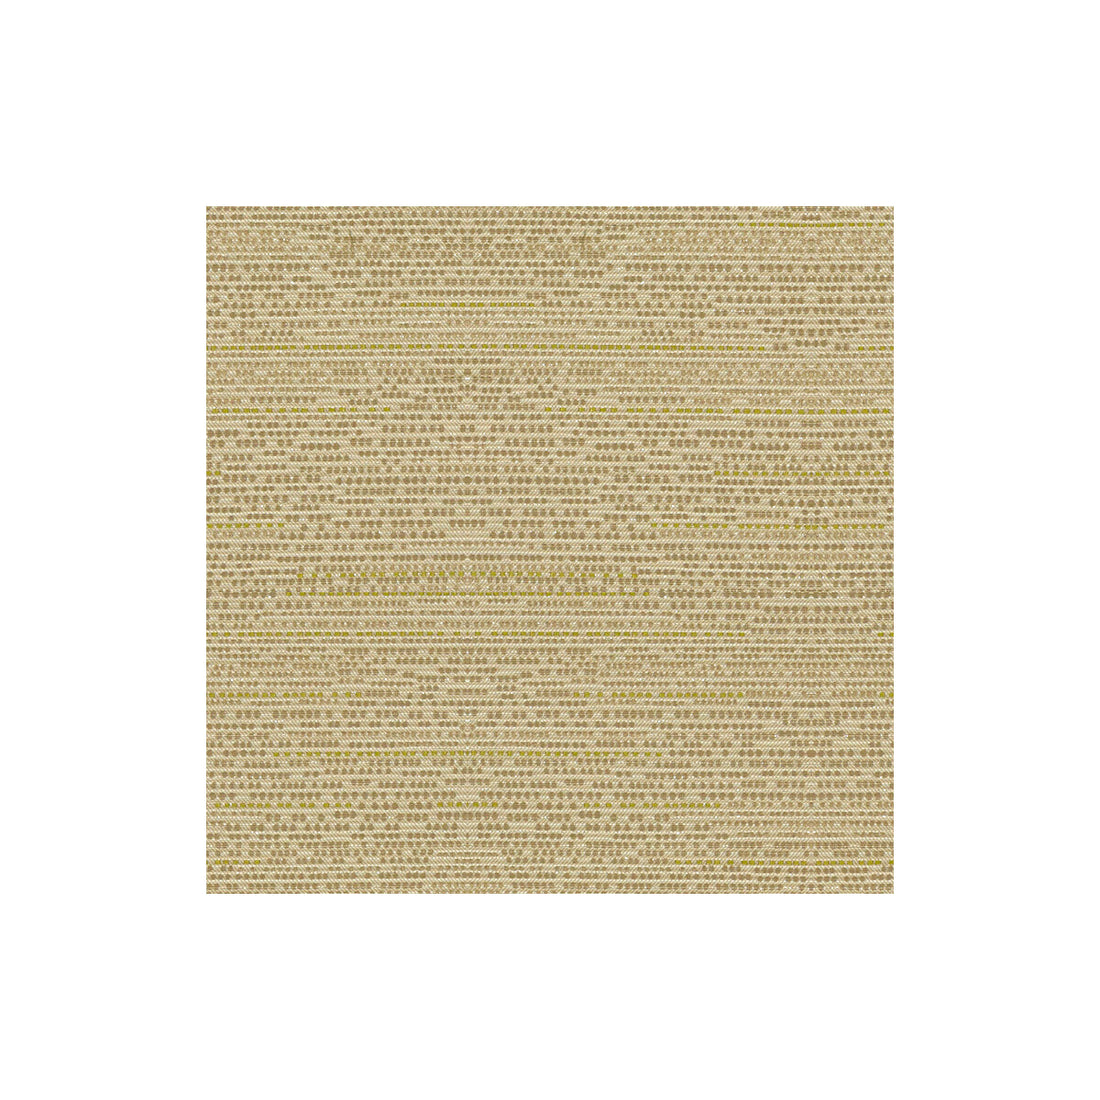 Waterline fabric in silver dune color - pattern 32934.311.0 - by Kravet Contract in the Contract Gis collection